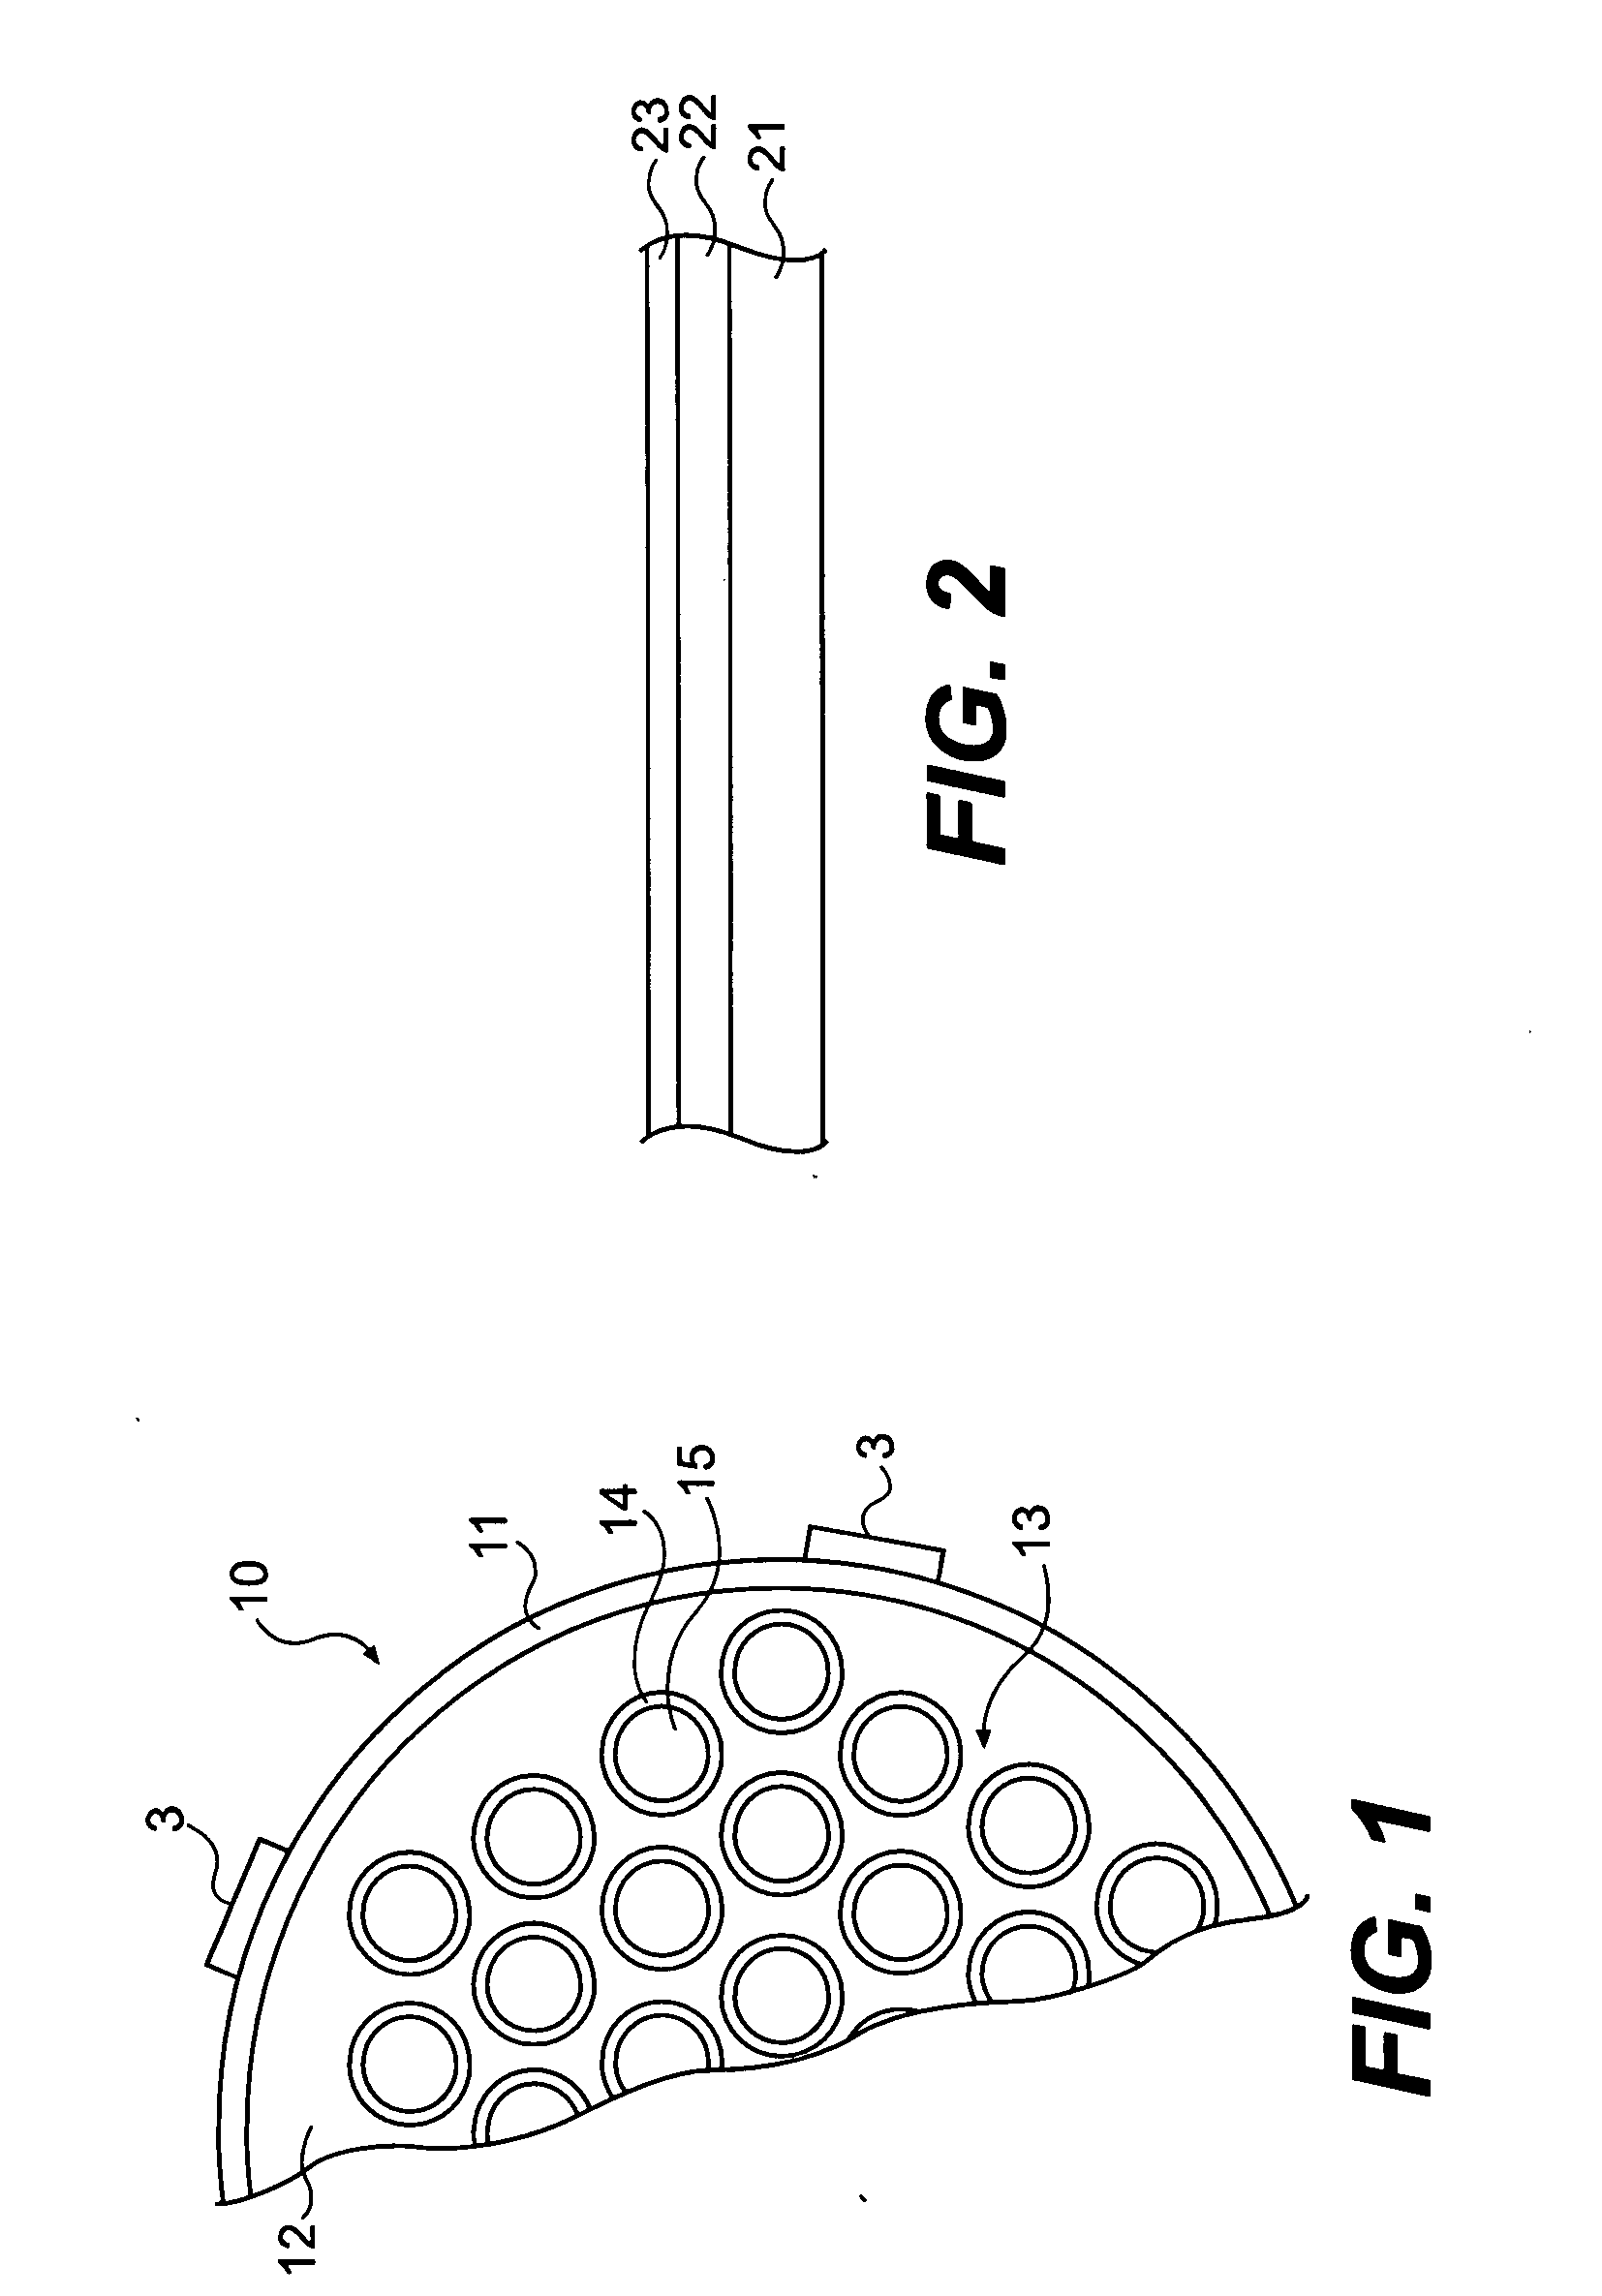 Insert and method for reducing fouling in a process stream